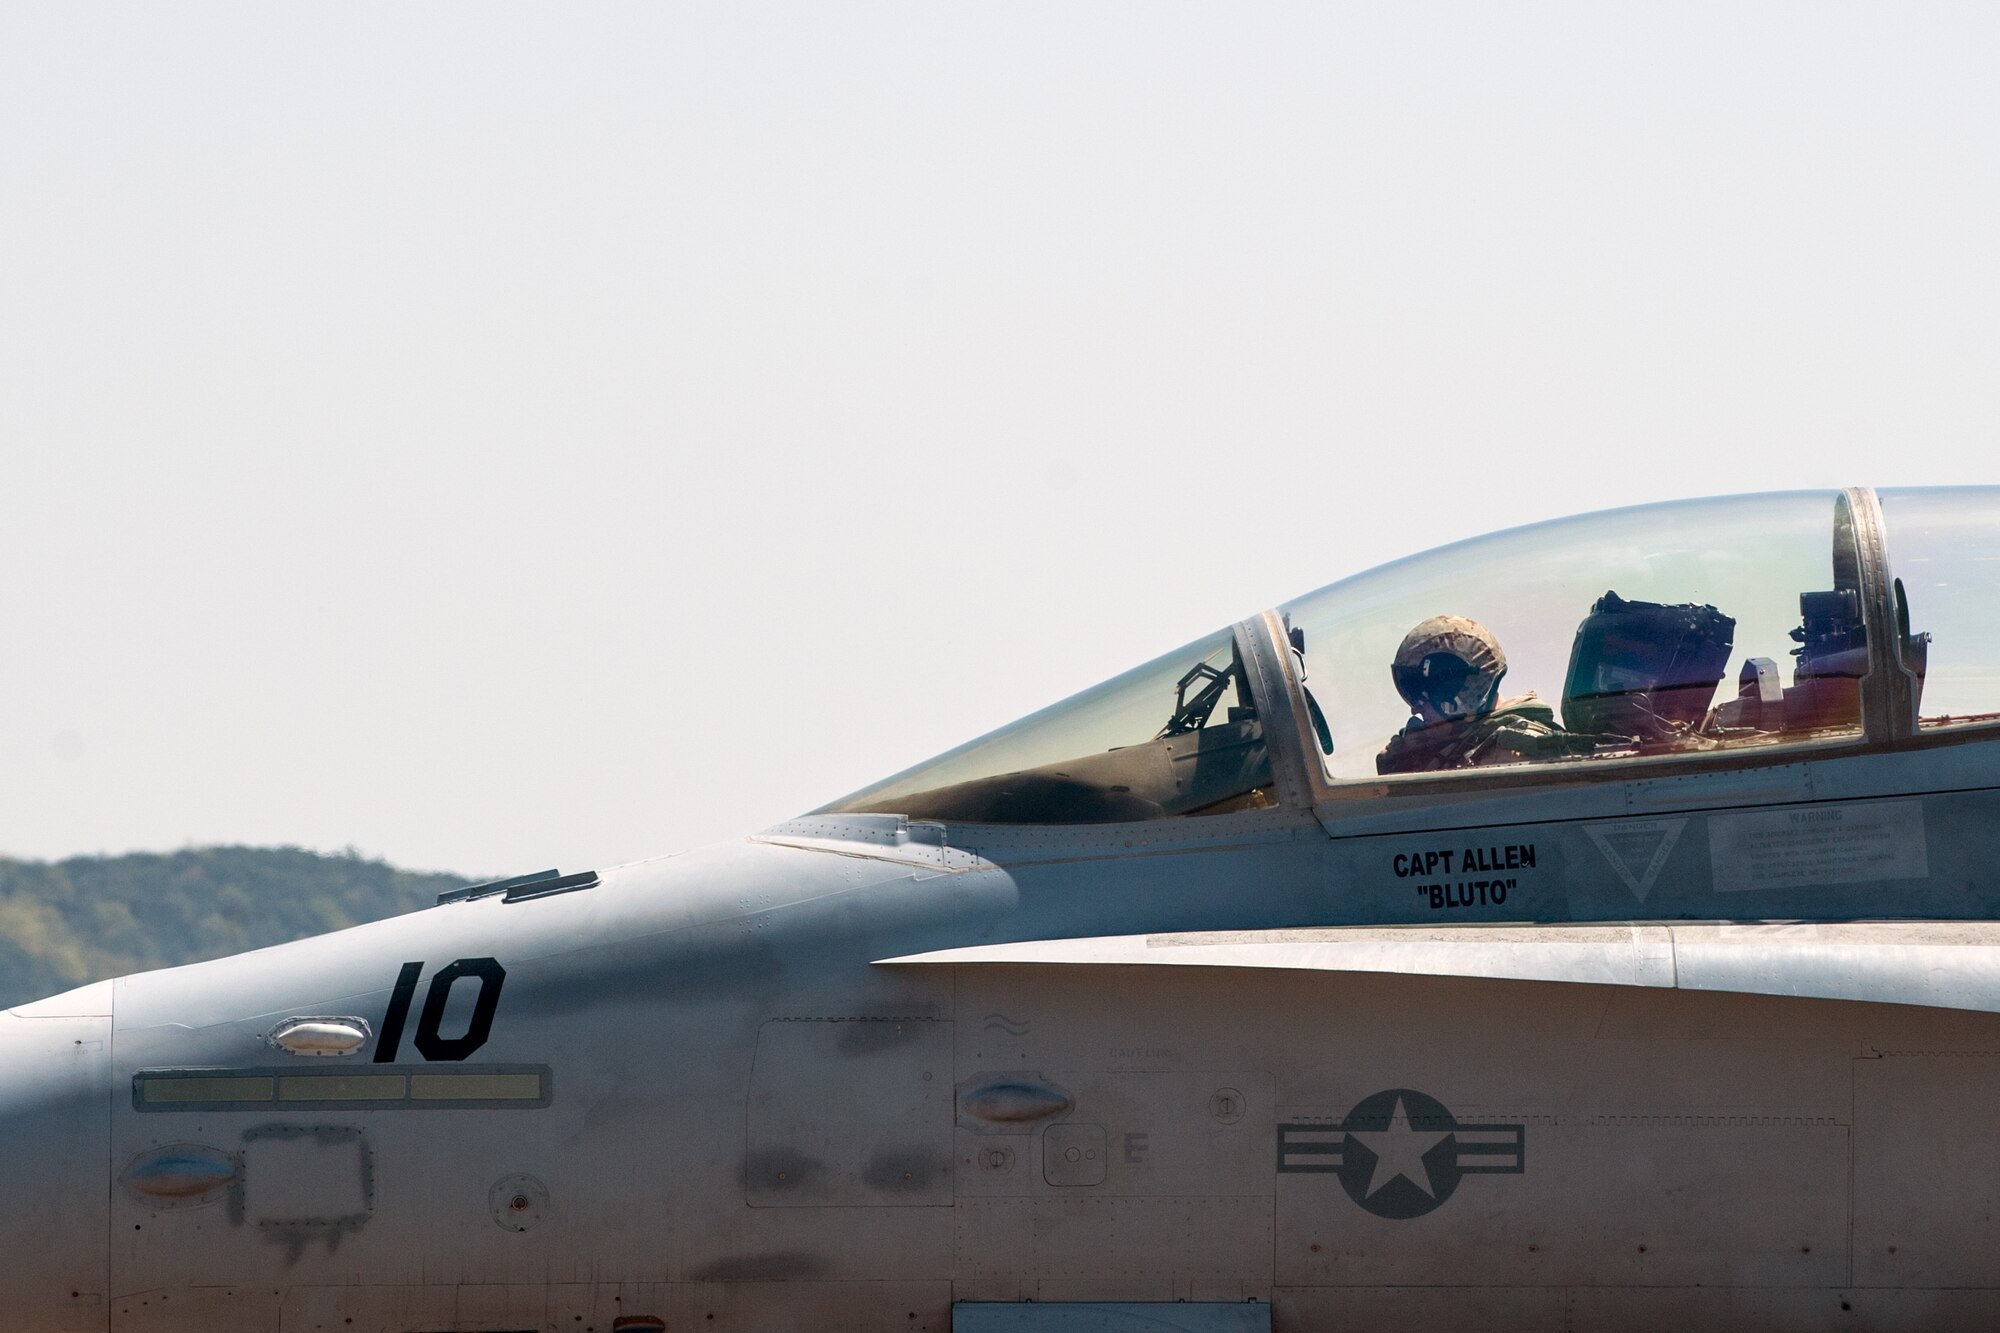 Marine Corps Capt. Jarrod Allen, a Marine Fighter Attack Squadron 225 F/A-18 Hornet pilot, taxis his jet to the runway during exercise Max Thunder 15-1 at Gwangju Air Base, South Korea, April 17, 2015. Jarrod was reunited with his brother, Air Force Capt. Jacob Allen, a 35th Fighter Squadron F-16 Fighting Falcon pilot, during the exercise. Max Thunder is a large-scale employment exercise designed to increase interoperability between U.S. and South Korea forces, and ultimately enhance commitments to maintain peace in the region. (U.S. Air Force photo/Senior Airman Taylor Curry) 